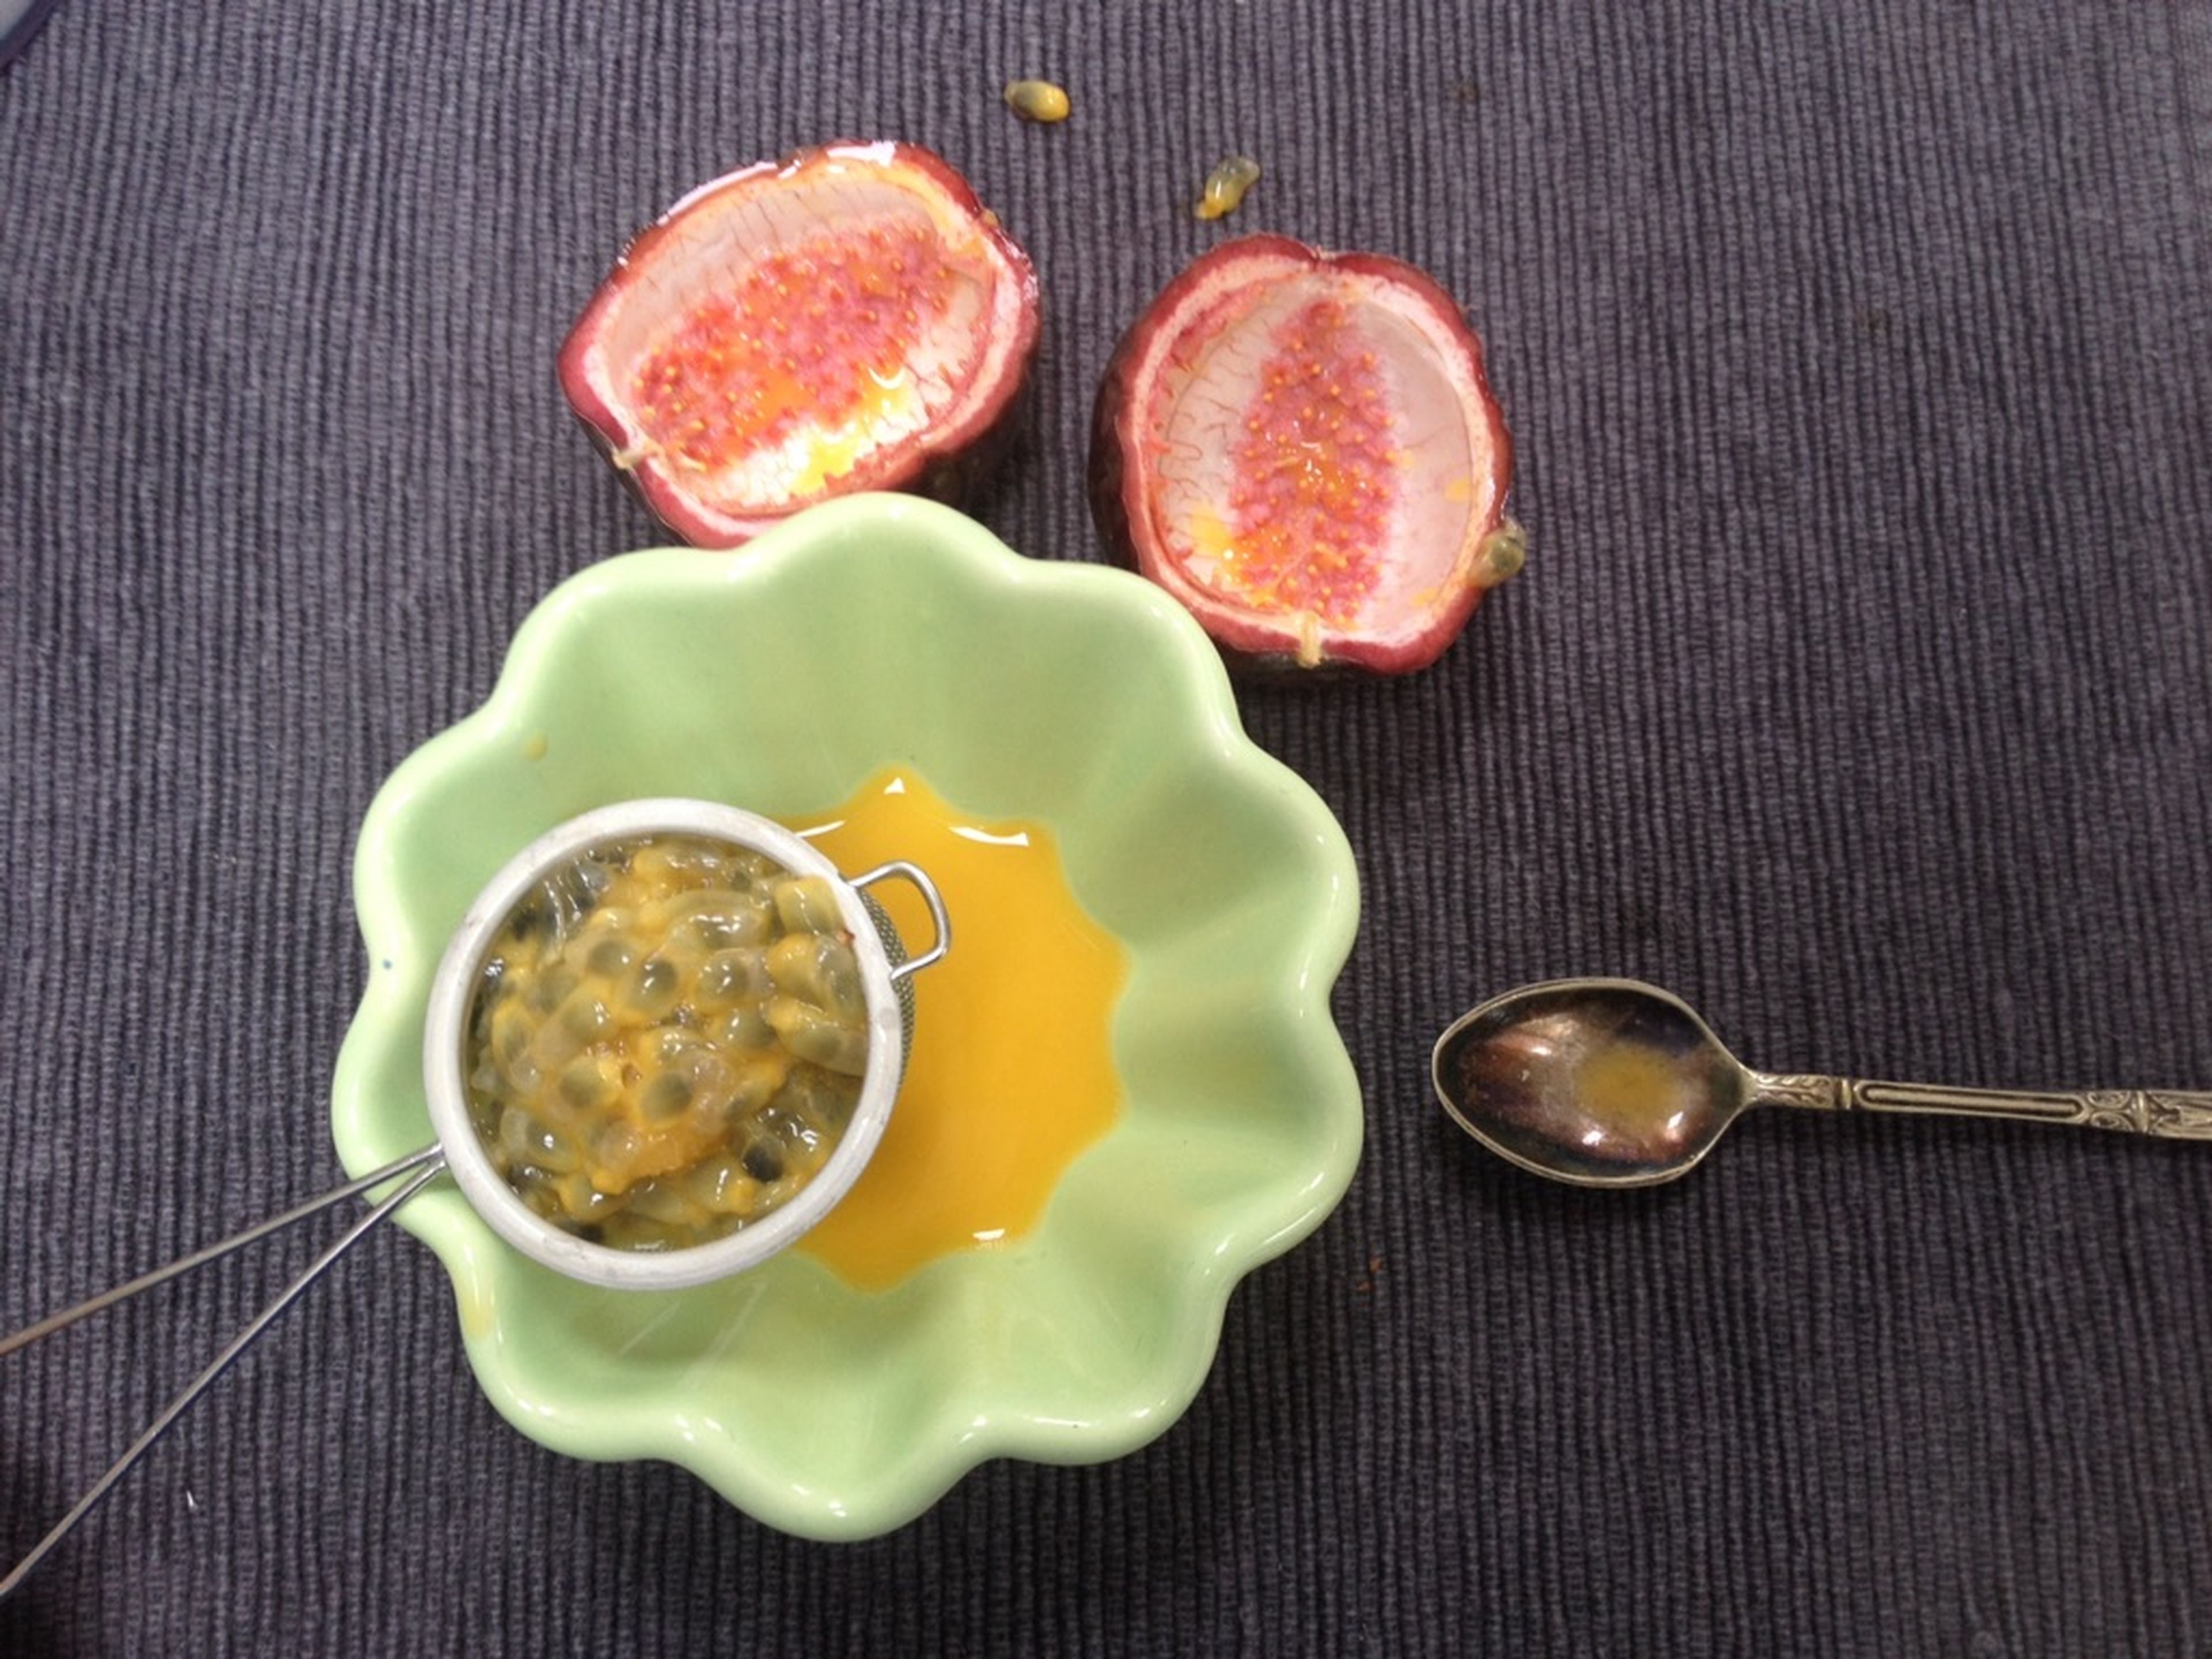 Halve the passion fruit and scoop the seeds into a fine sieve. Strain.